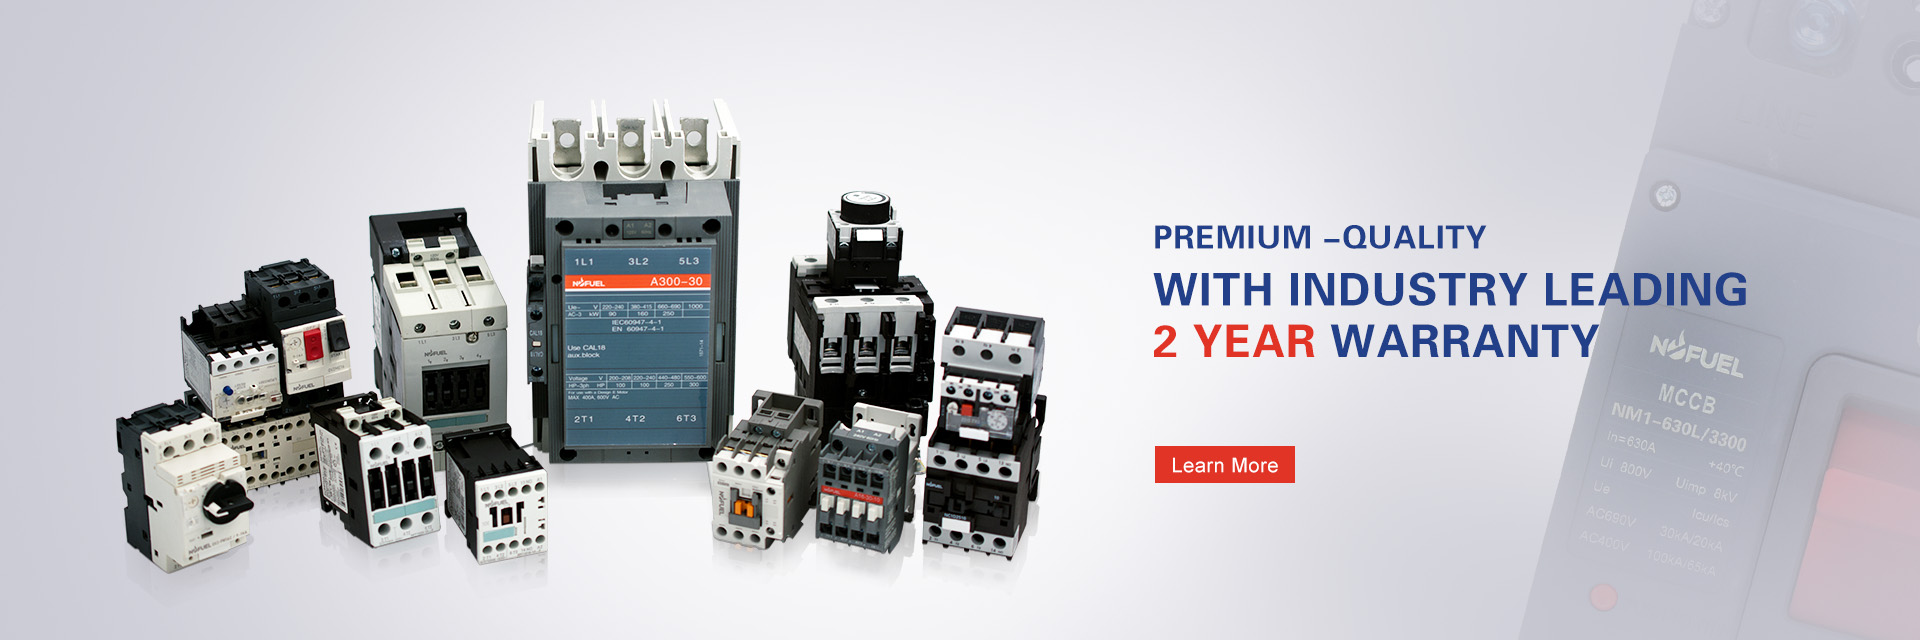 Premium -Quality  with Industry leading 2 year Warranty